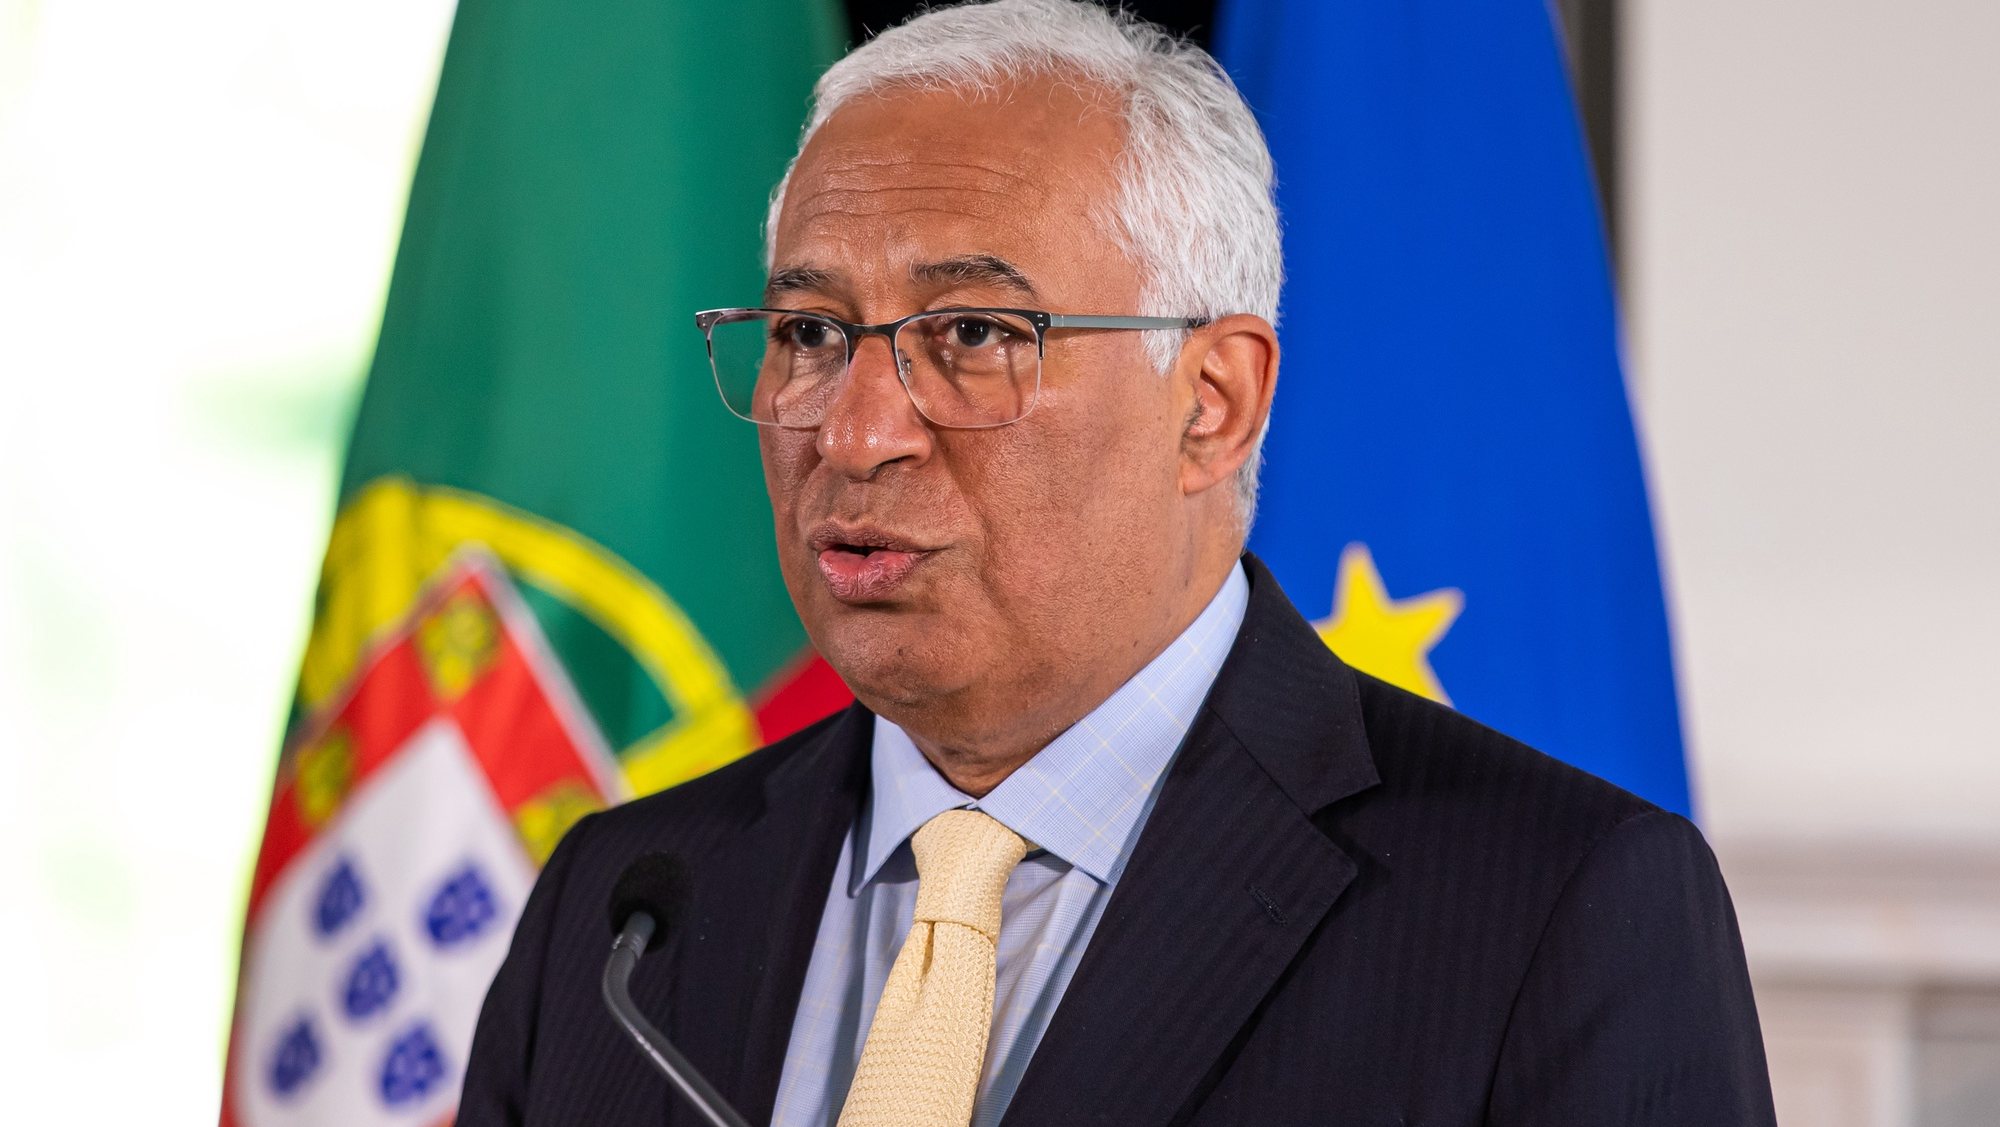 Portuguese Prime Minister Antonio Costa speaks to journalists during a press conference after a video meeting with his Ukrainian counterpart (Denys Shmygal ) at Palacio de Sao Bento, in Lisbon, Portugal, 04 May 2022. The meeting was held to discuss the bilateral cooperation between the two countries and to analyze the current situation amid the Russian invasion of Ukraine. JOSE SENA GOULAO/LUSA